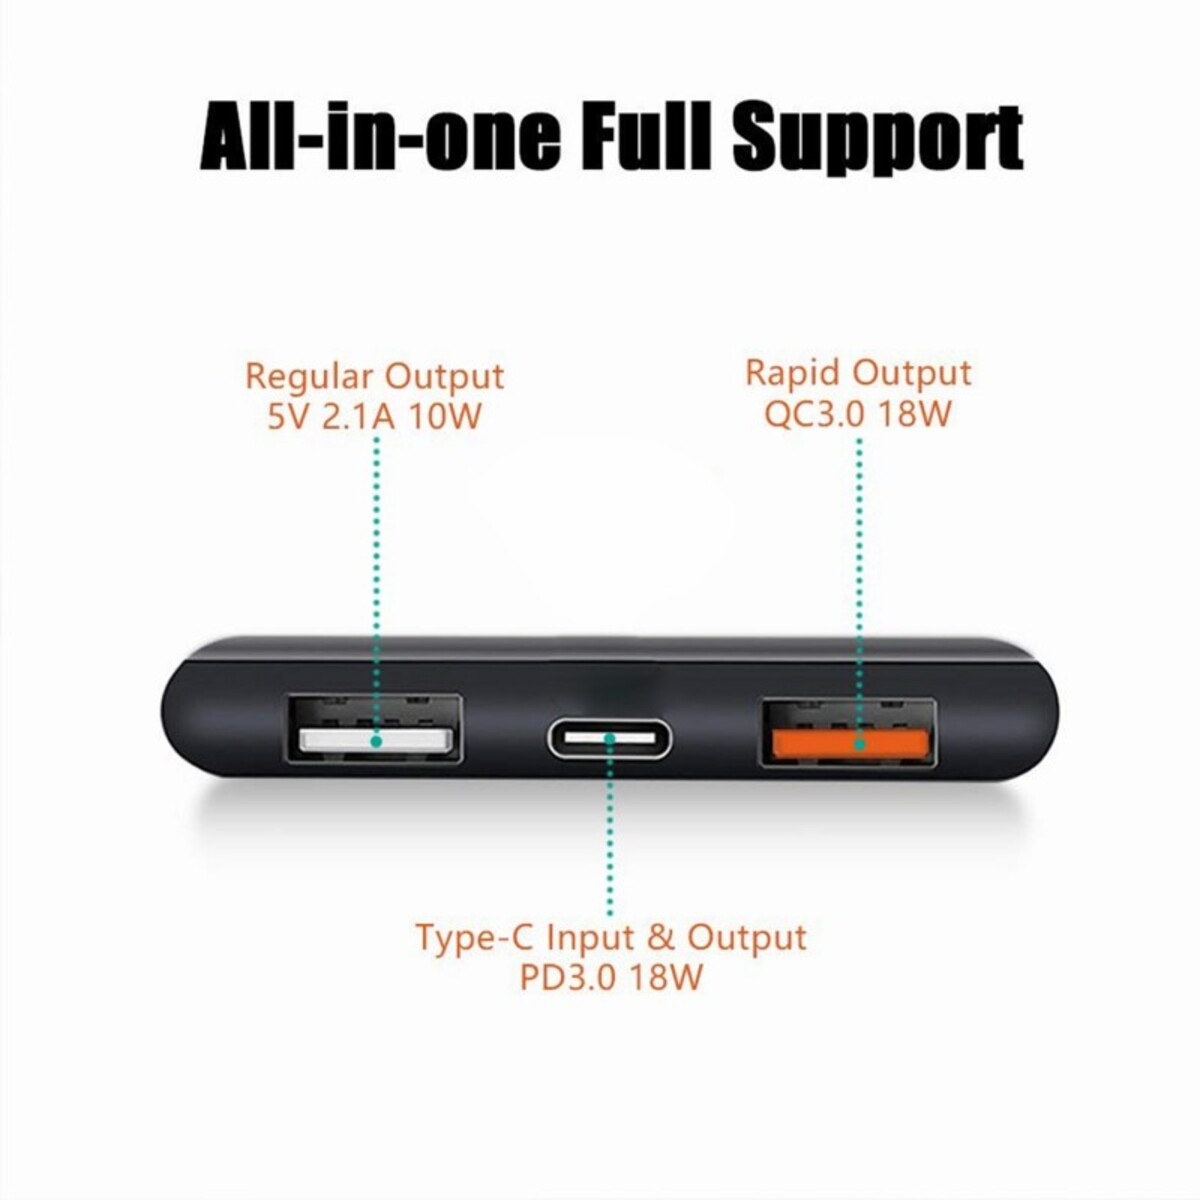 Trands Portable Power Bank For Smartphones PB1050